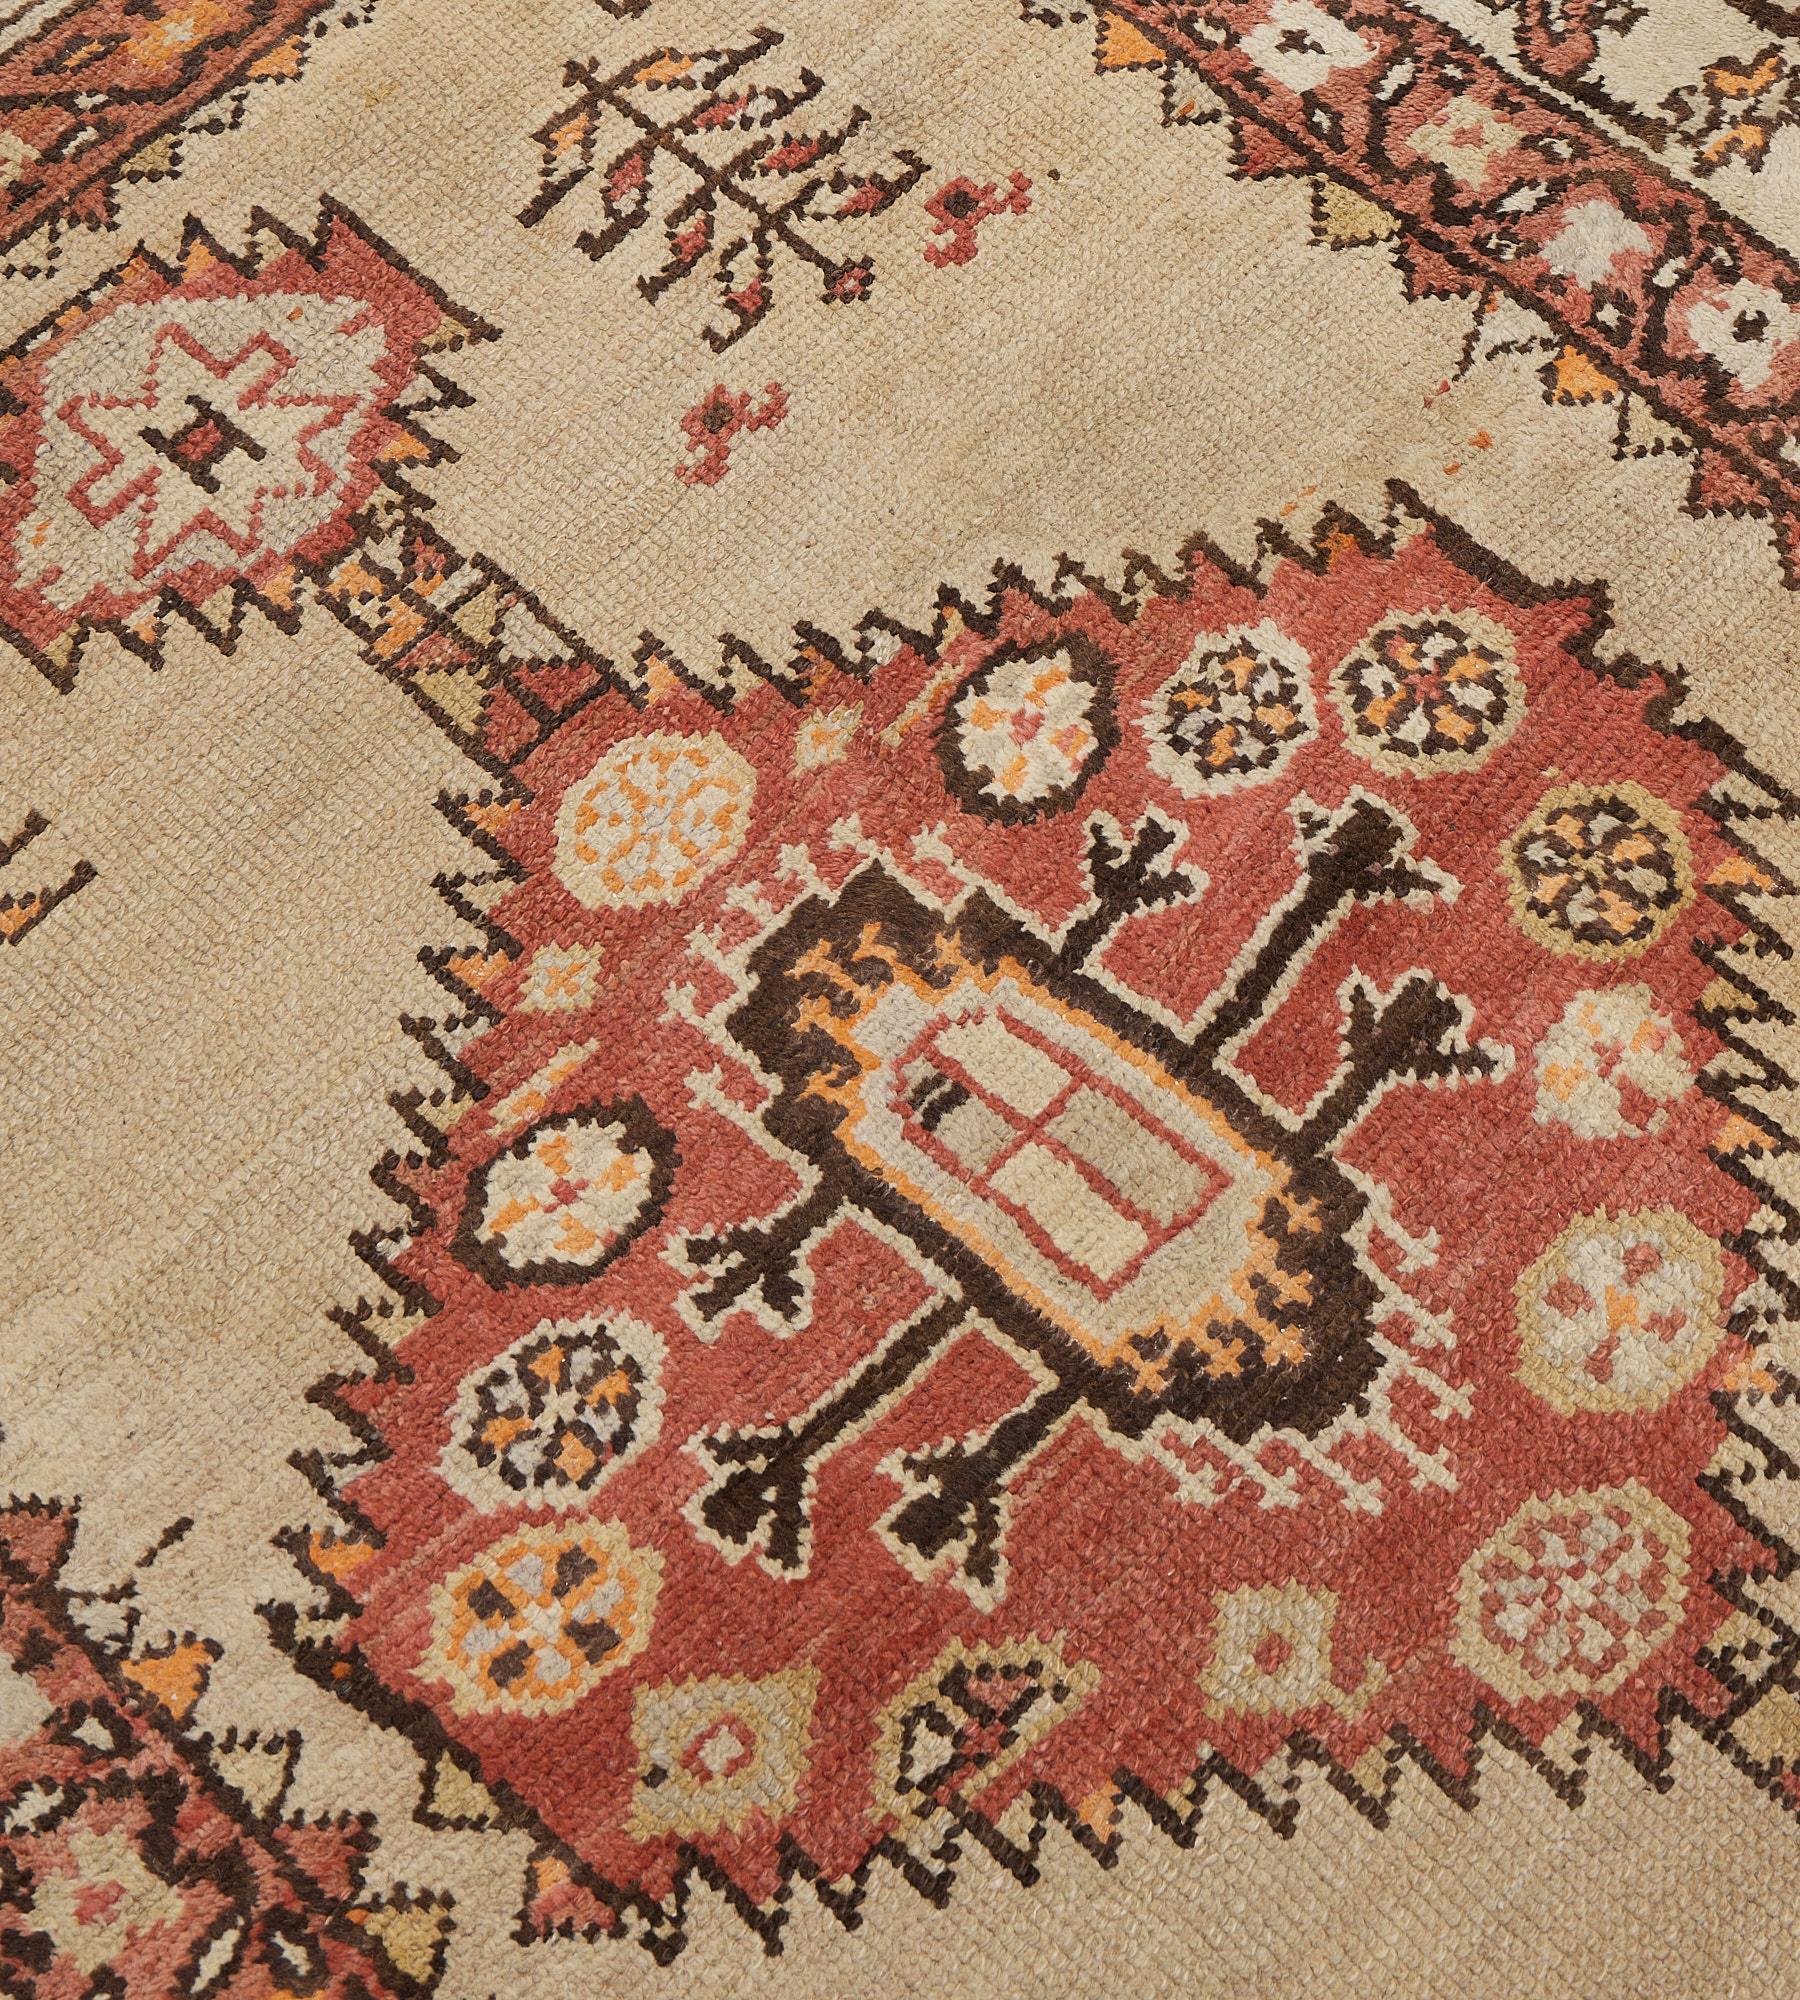 Antique Hand-Knotted Floral Wool Persian Serab Runner For Sale 1